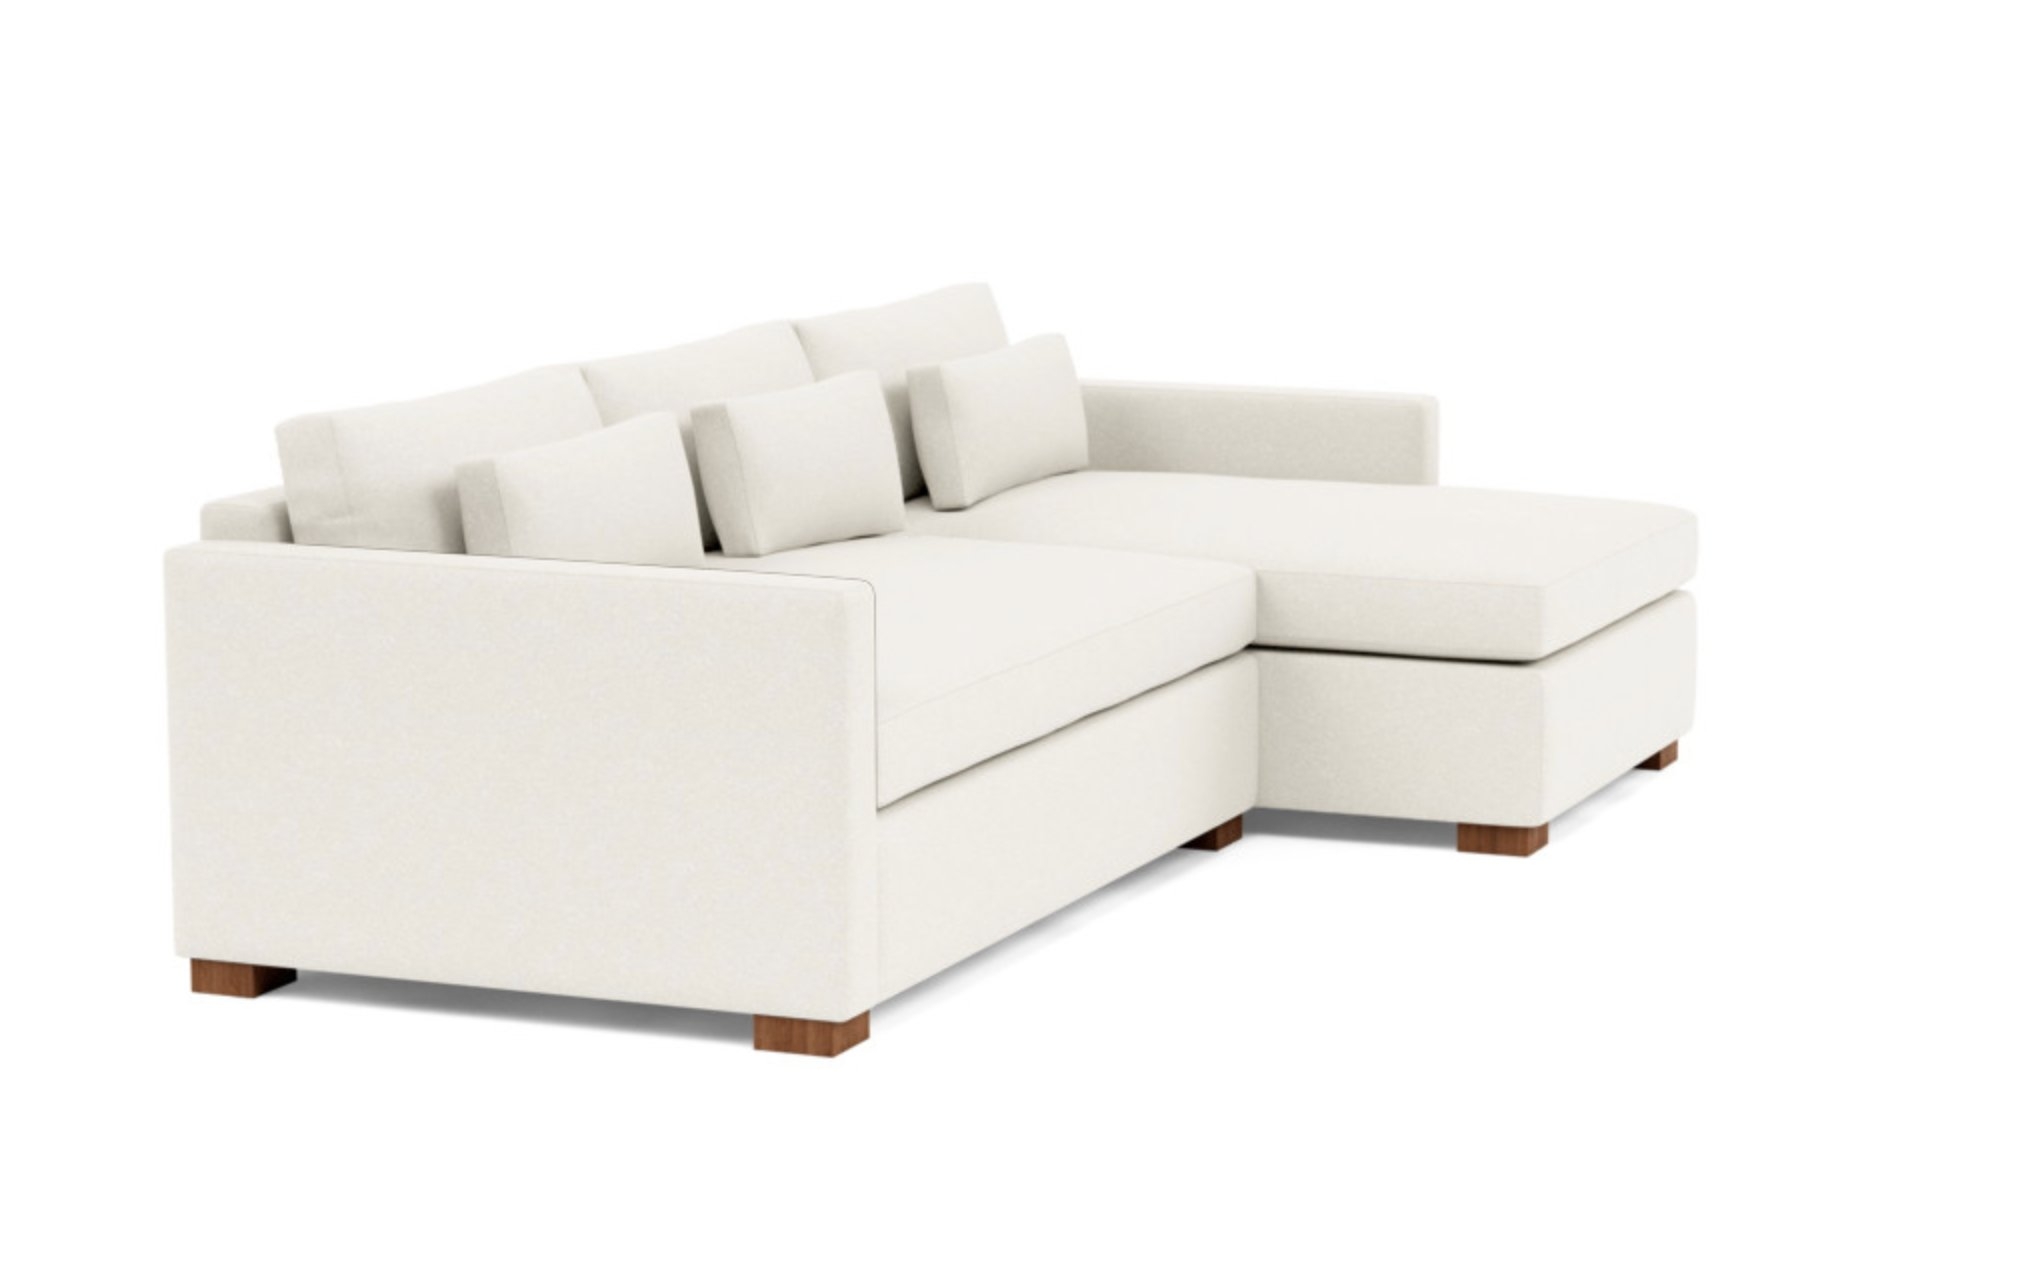 Charly Right Sectional with White Cirrus Fabric and Oiled Walnut legs - Image 1